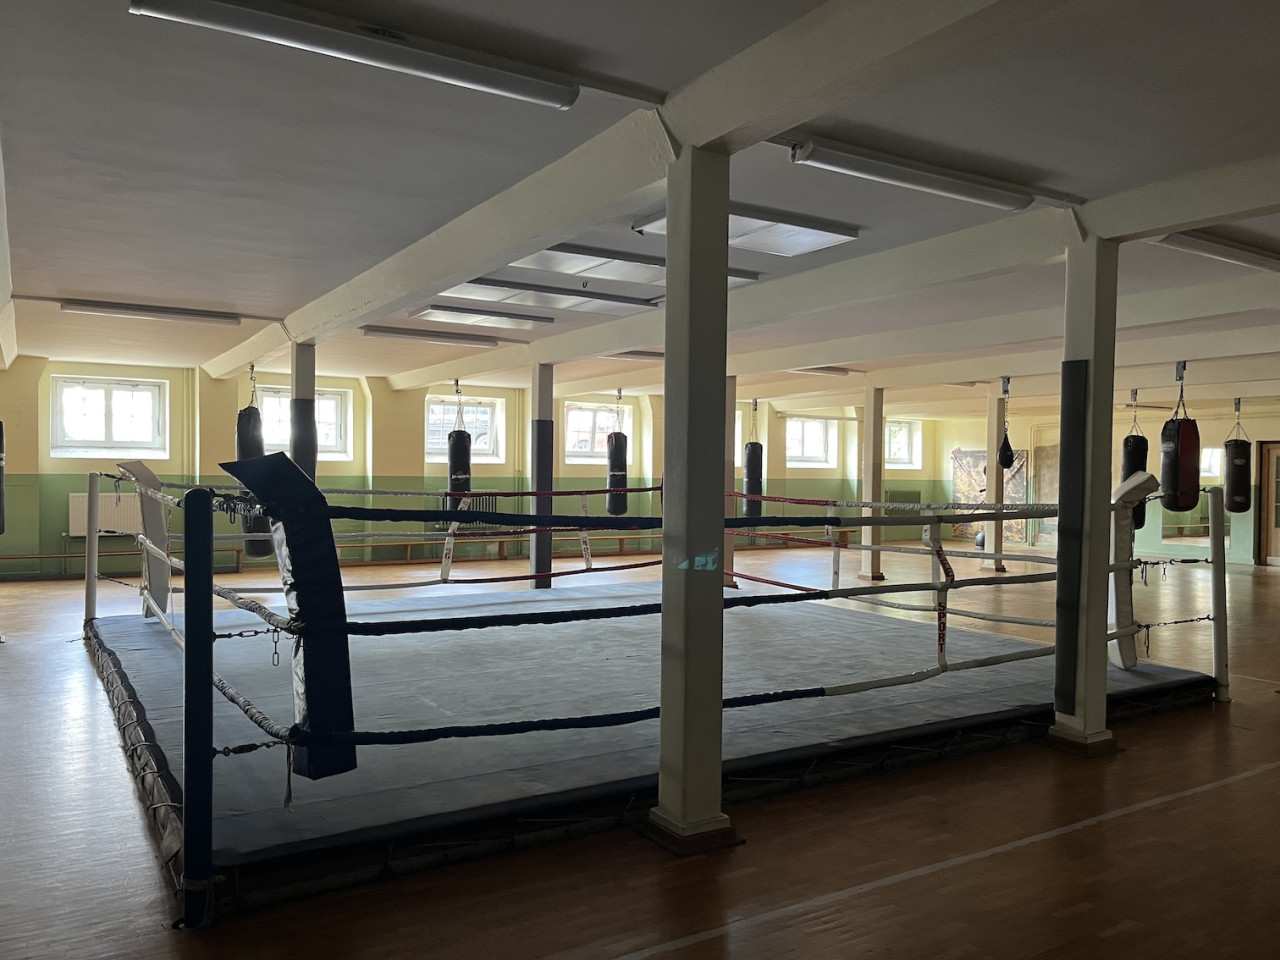 plush74 location film photo event germany berlin vintage gym fitness boxing 166